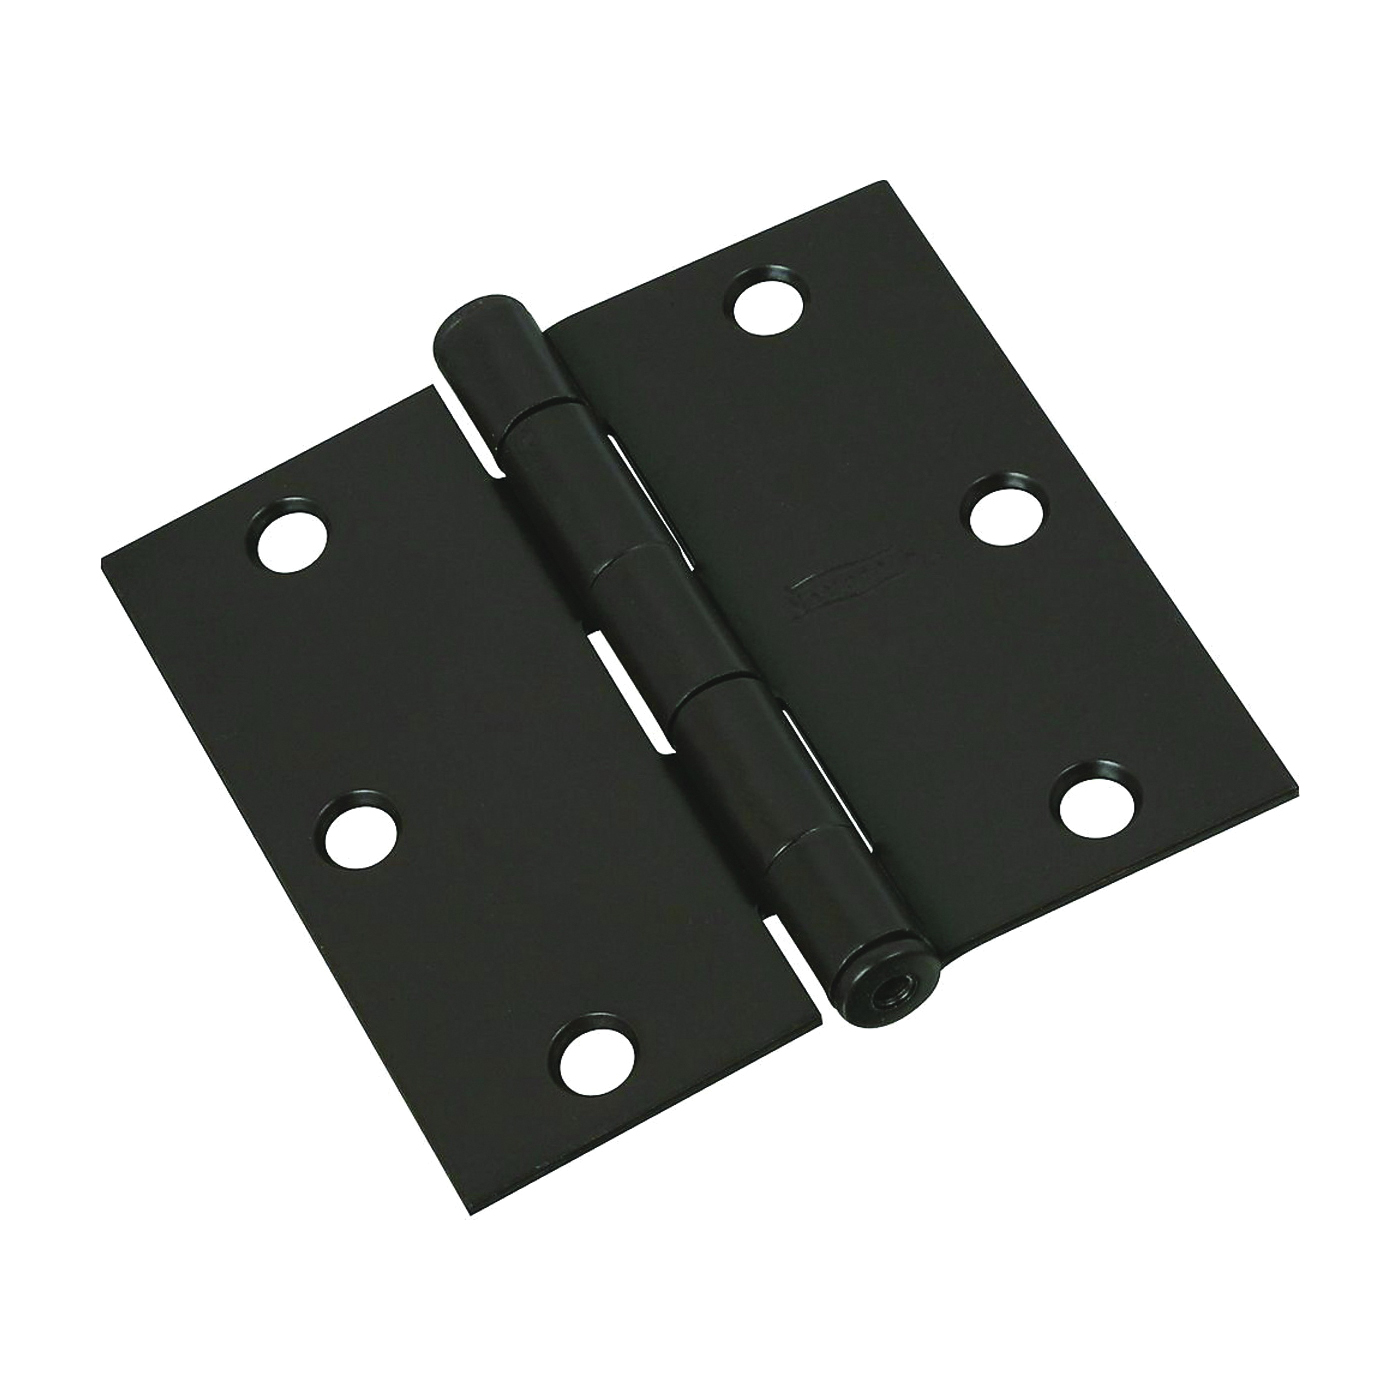 N830-203 Door Hinge, Steel, Oil-Rubbed Bronze, Non-Rising, Removable Pin, Full-Mortise Mounting